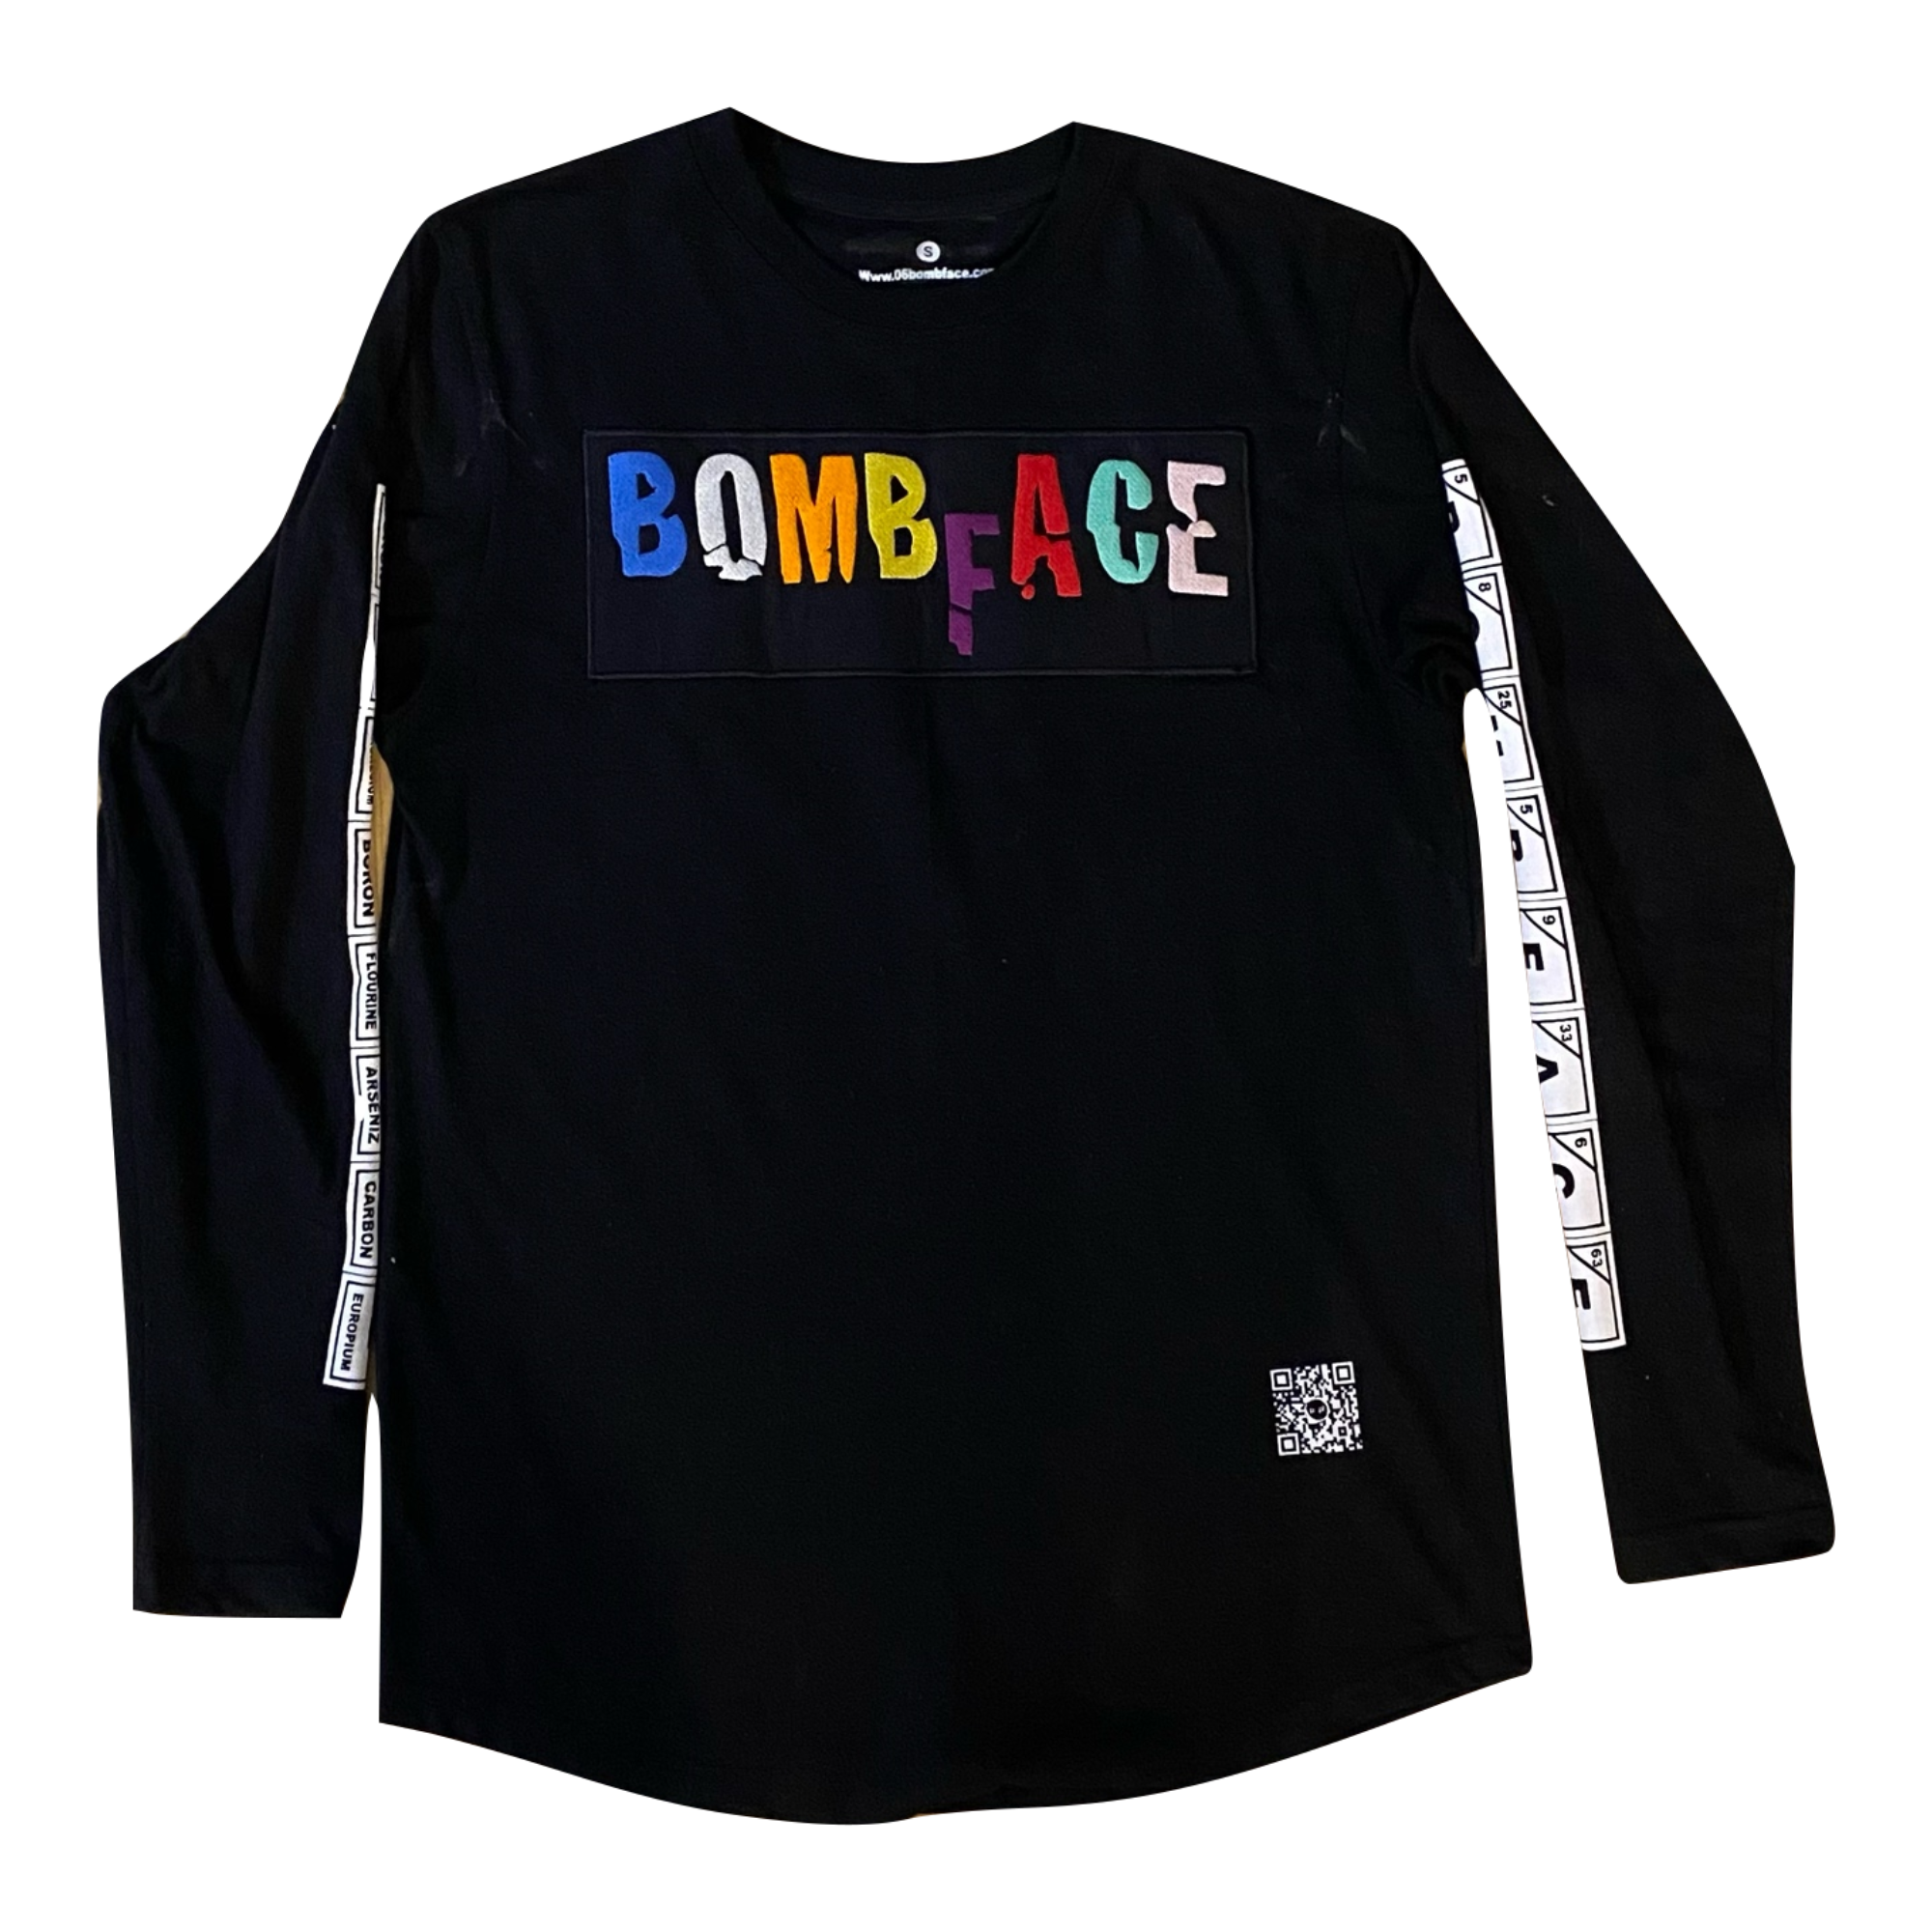 Black longsleeve t-shrit, BombFace Chemistry. Embroidery patch on the shirt, and screen printed bombface in chemistry formula on the side of the shirt. The patch on the from of the shirt is multi-color. heavy cotton t-shirt. 